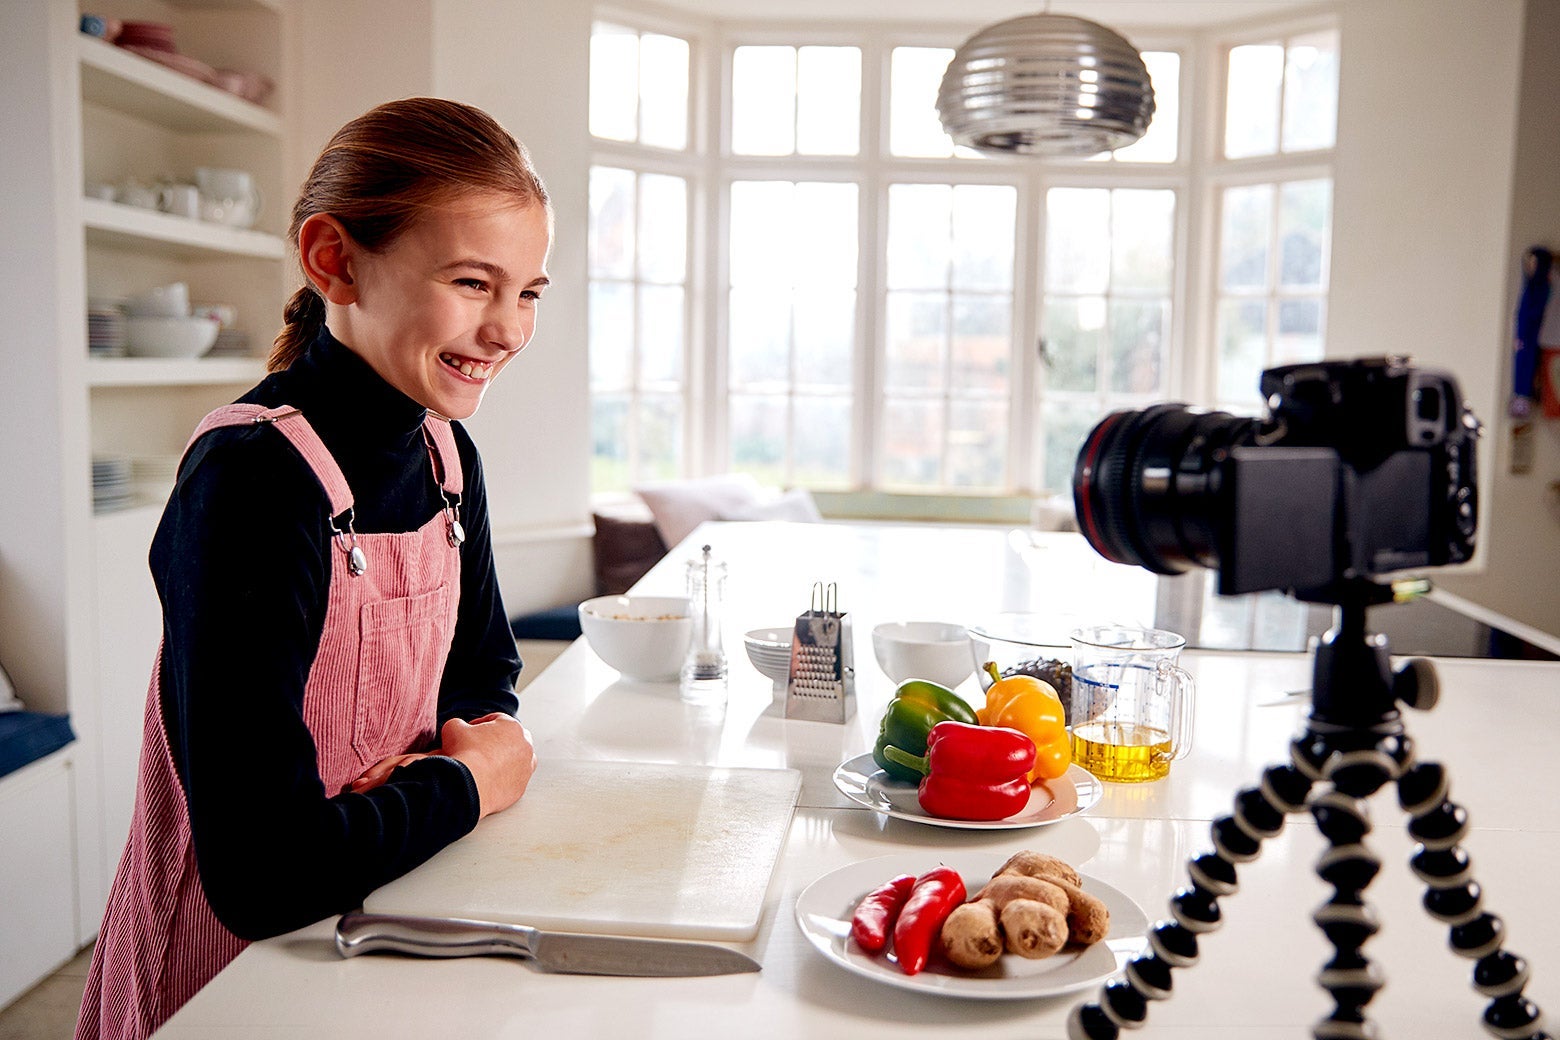 A young girl standing in a kitchen grins at a camera set up on the counter.